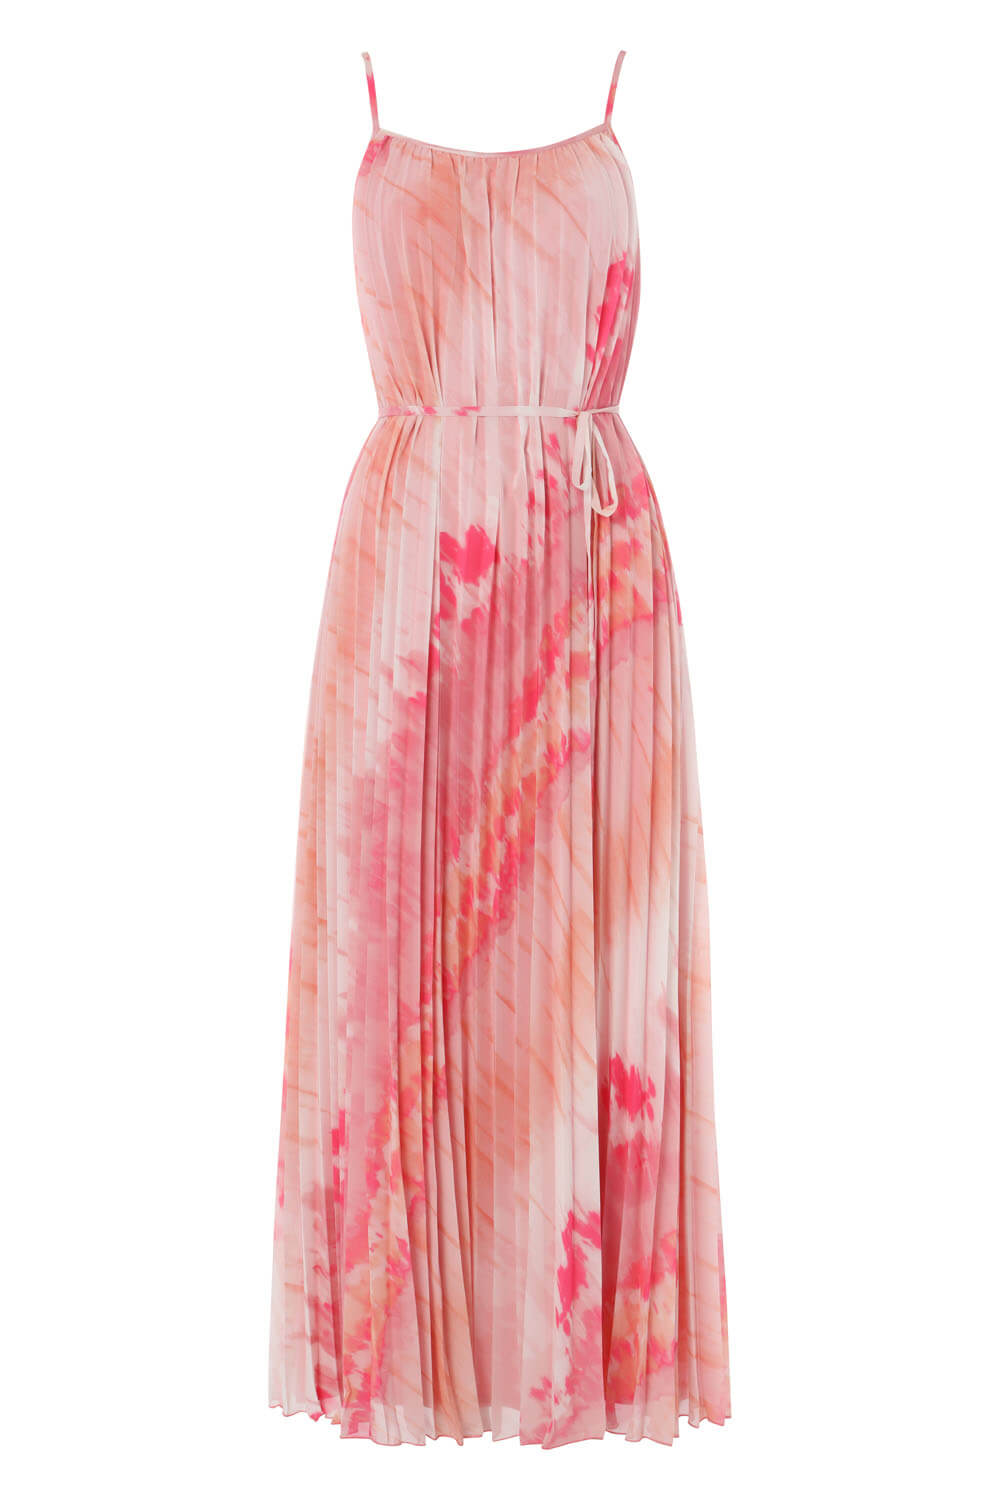 PINK Pleated Tie Dye Effect Maxi Dress, Image 4 of 4